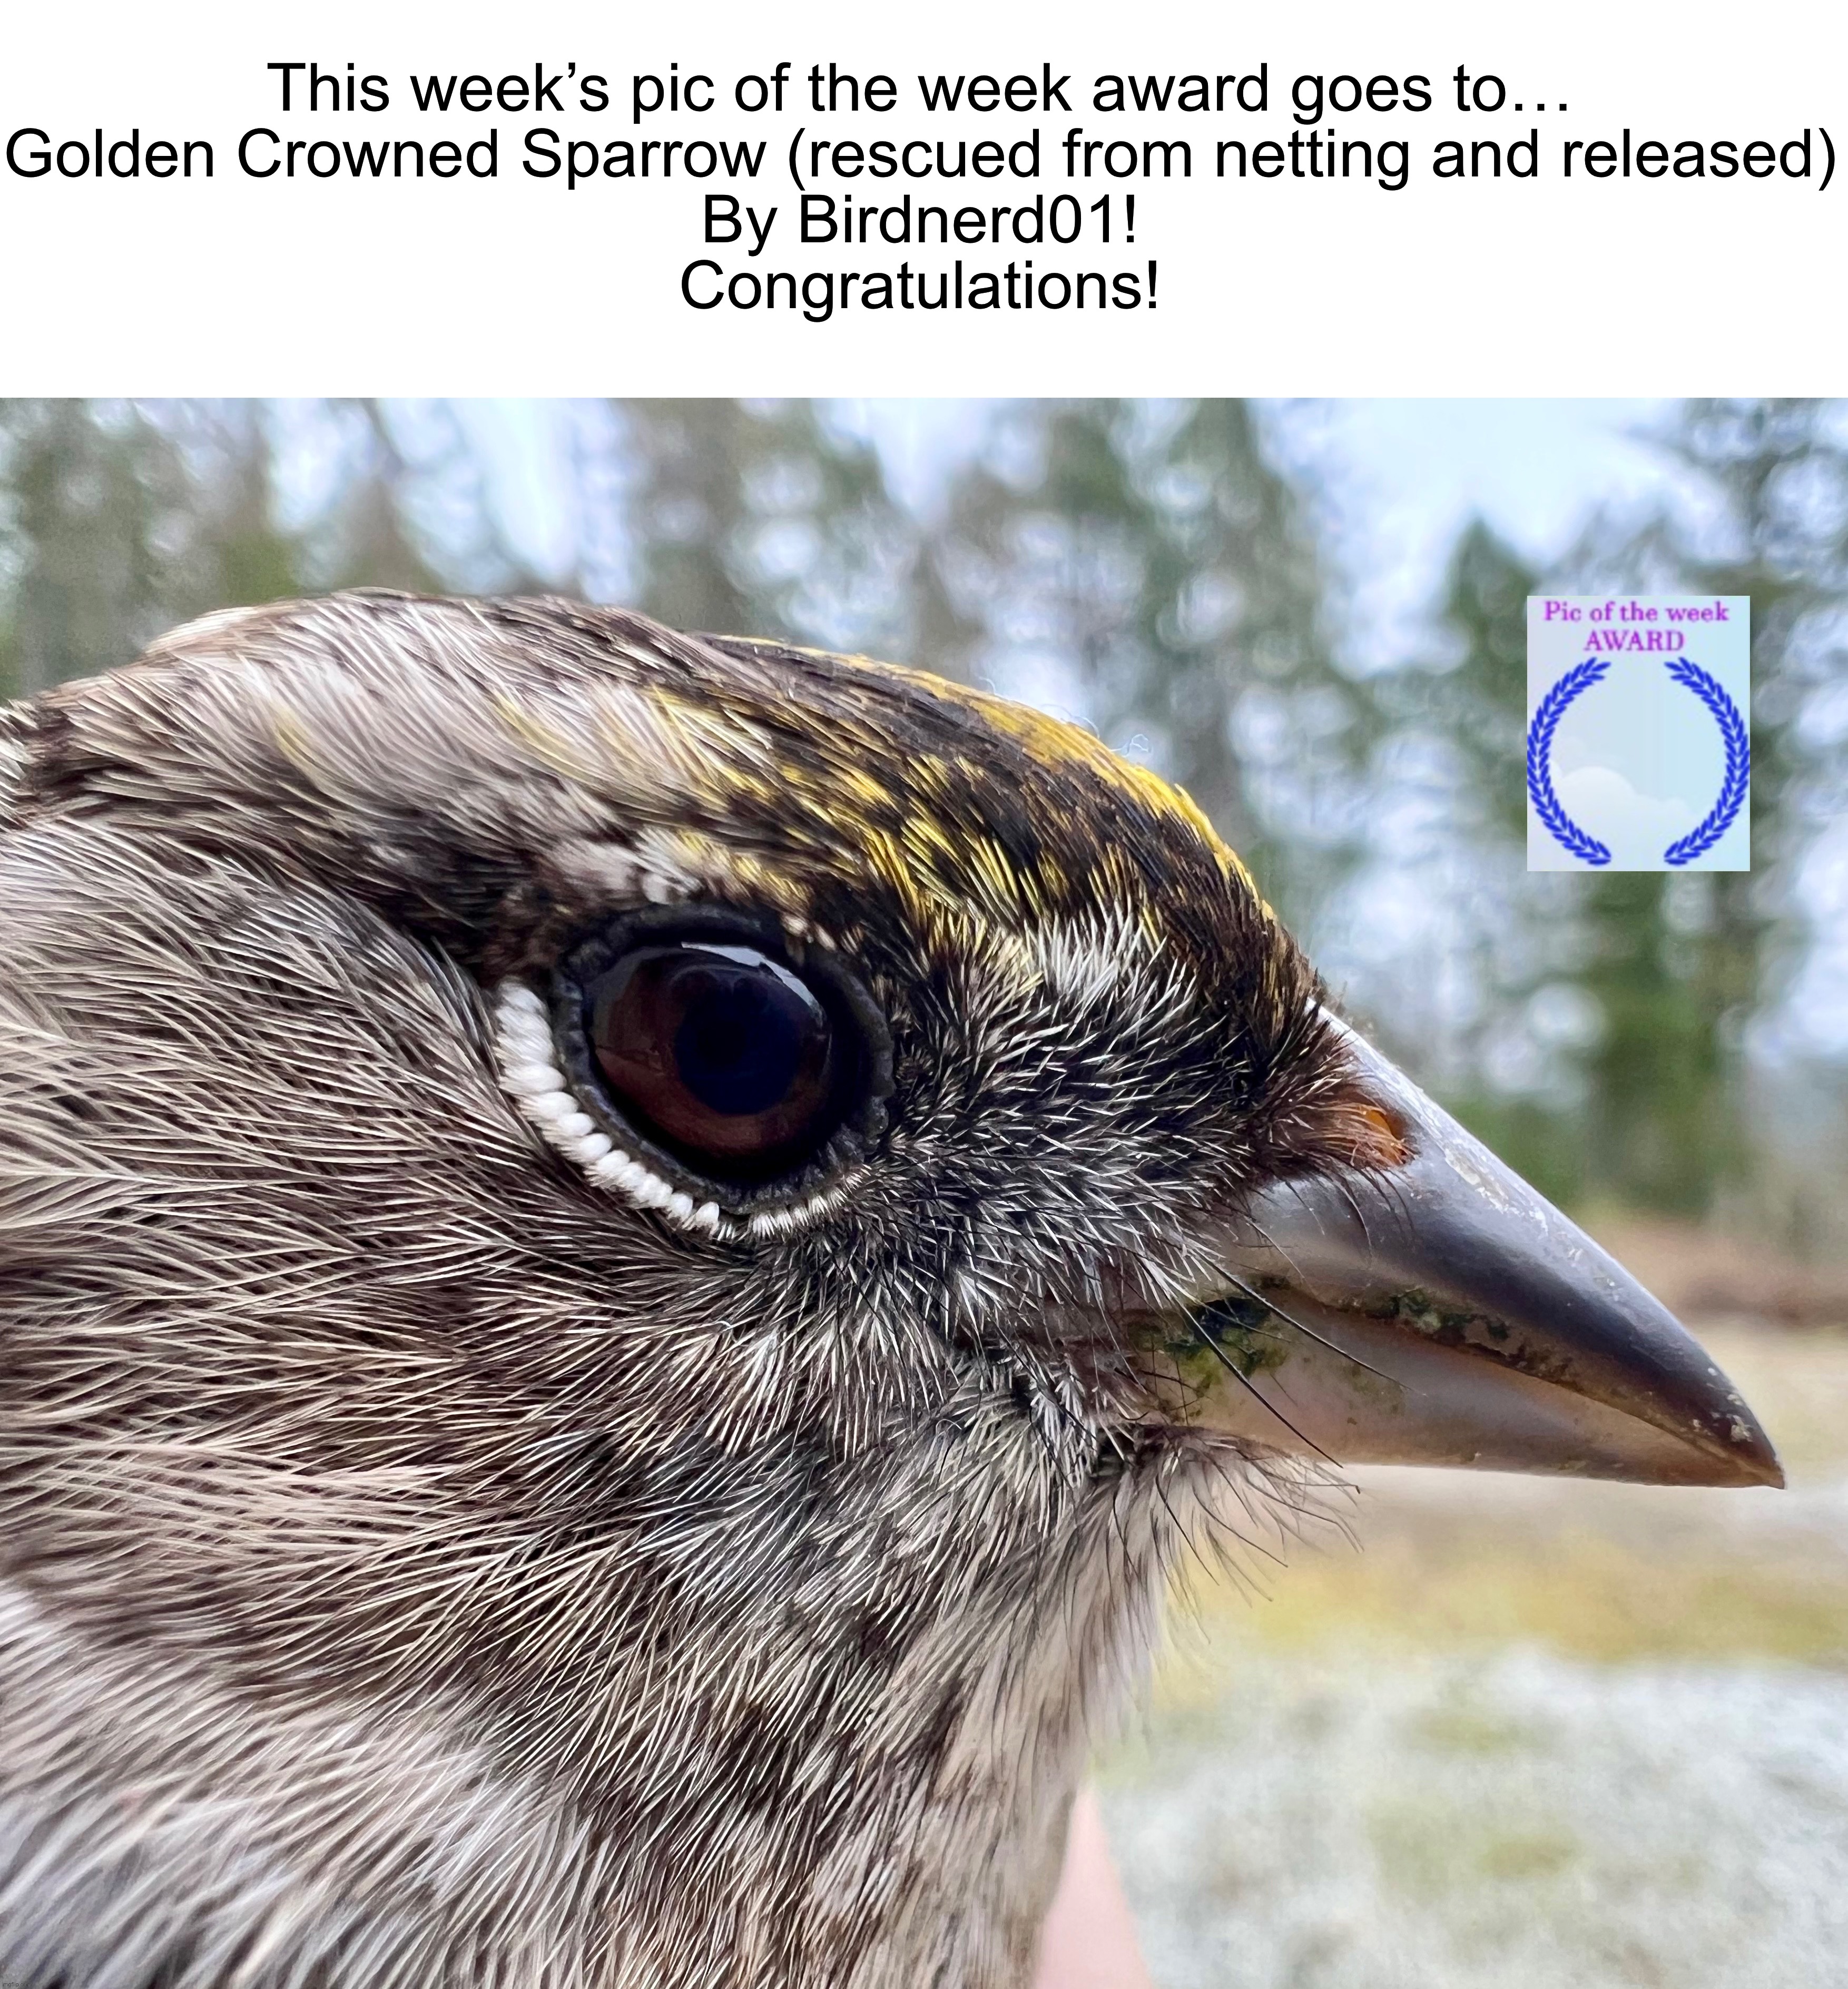 Golden Crowned Sparrow (rescued from netting and released) by @Birdnerd01 https://imgflip.com/i/7bk2dg | This week’s pic of the week award goes to…
Golden Crowned Sparrow (rescued from netting and released)
By Birdnerd01!
Congratulations! | image tagged in share your own photos | made w/ Imgflip meme maker